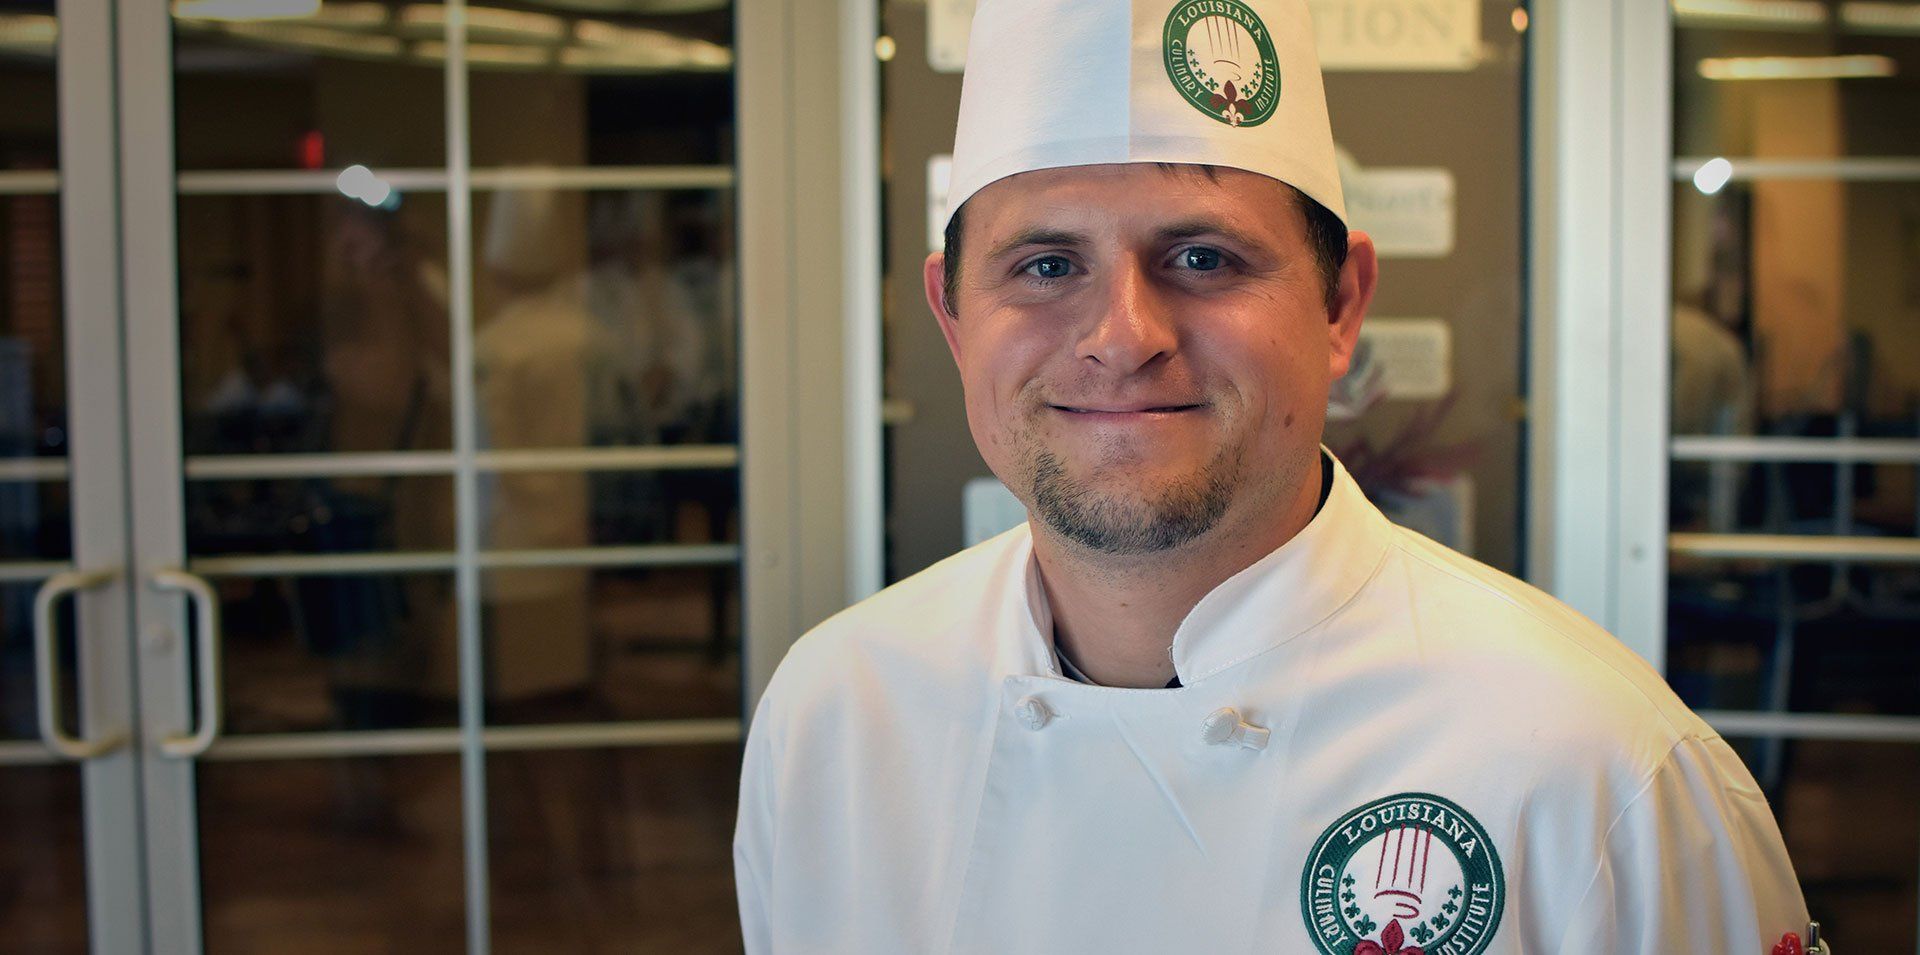 Chef Colt Patin Chef instructor at Louisiana Culinary Institute